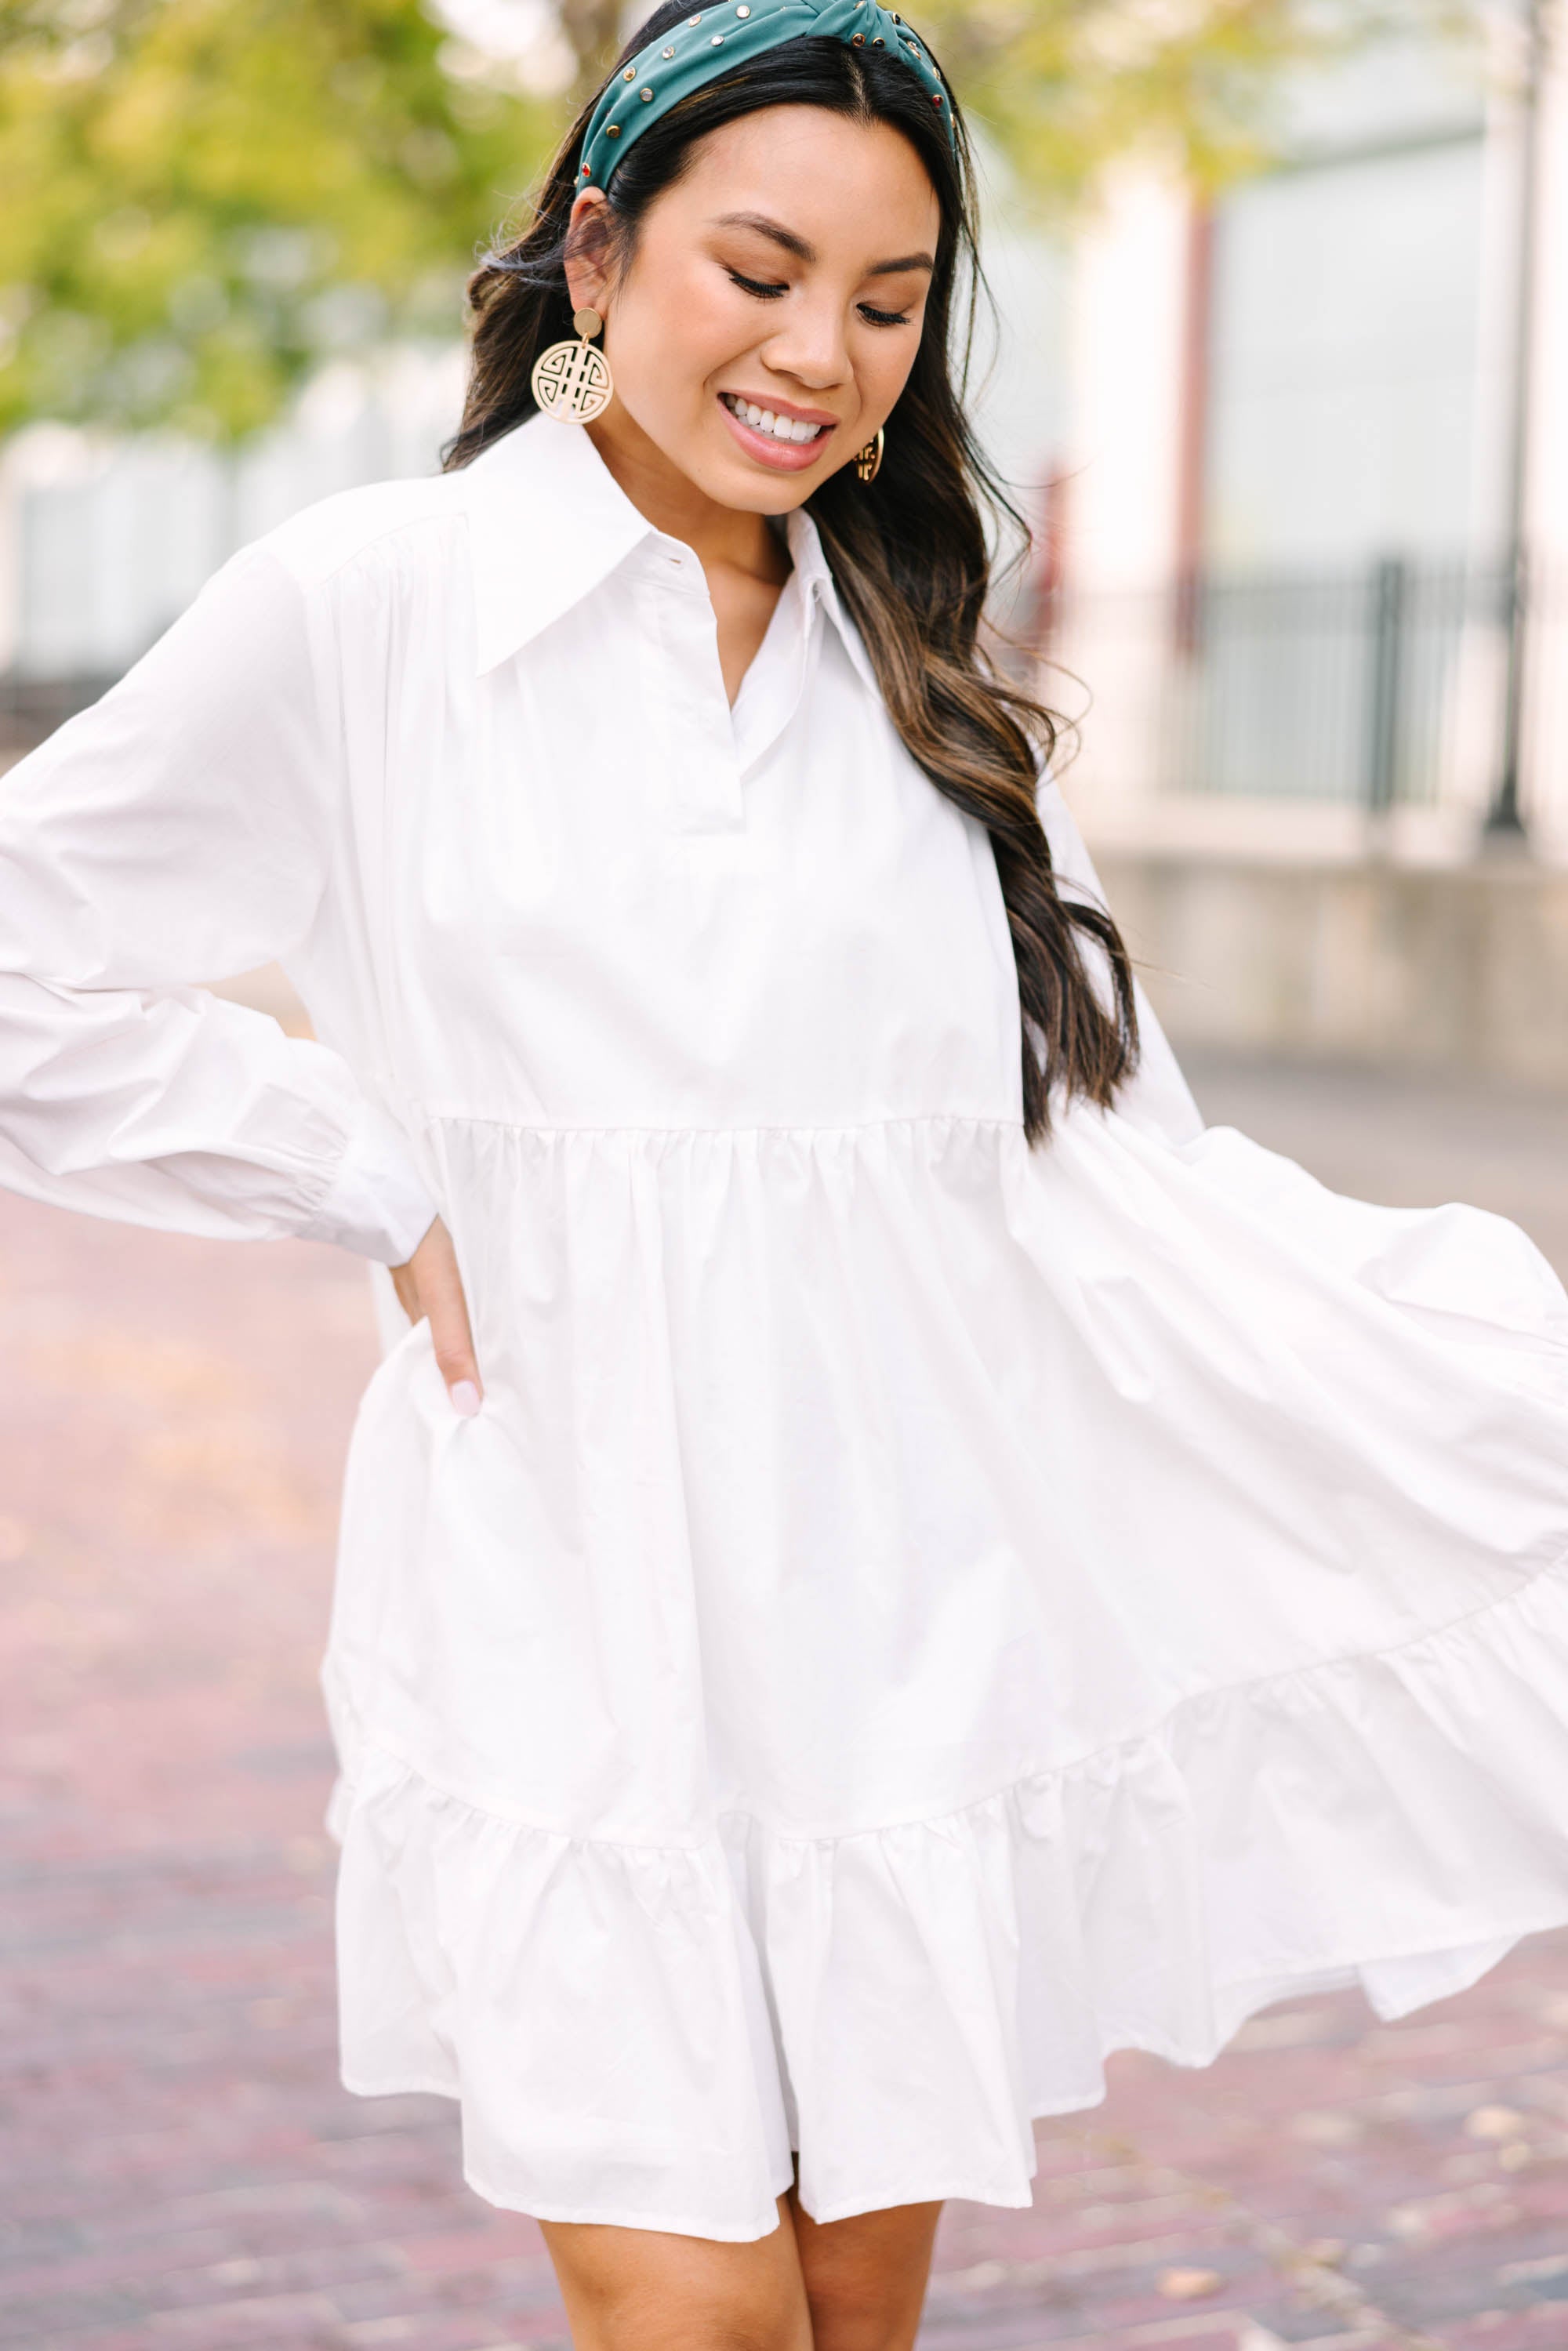 The Mint Julep Boutique - Need You More White Babydoll Dress | Modvisor